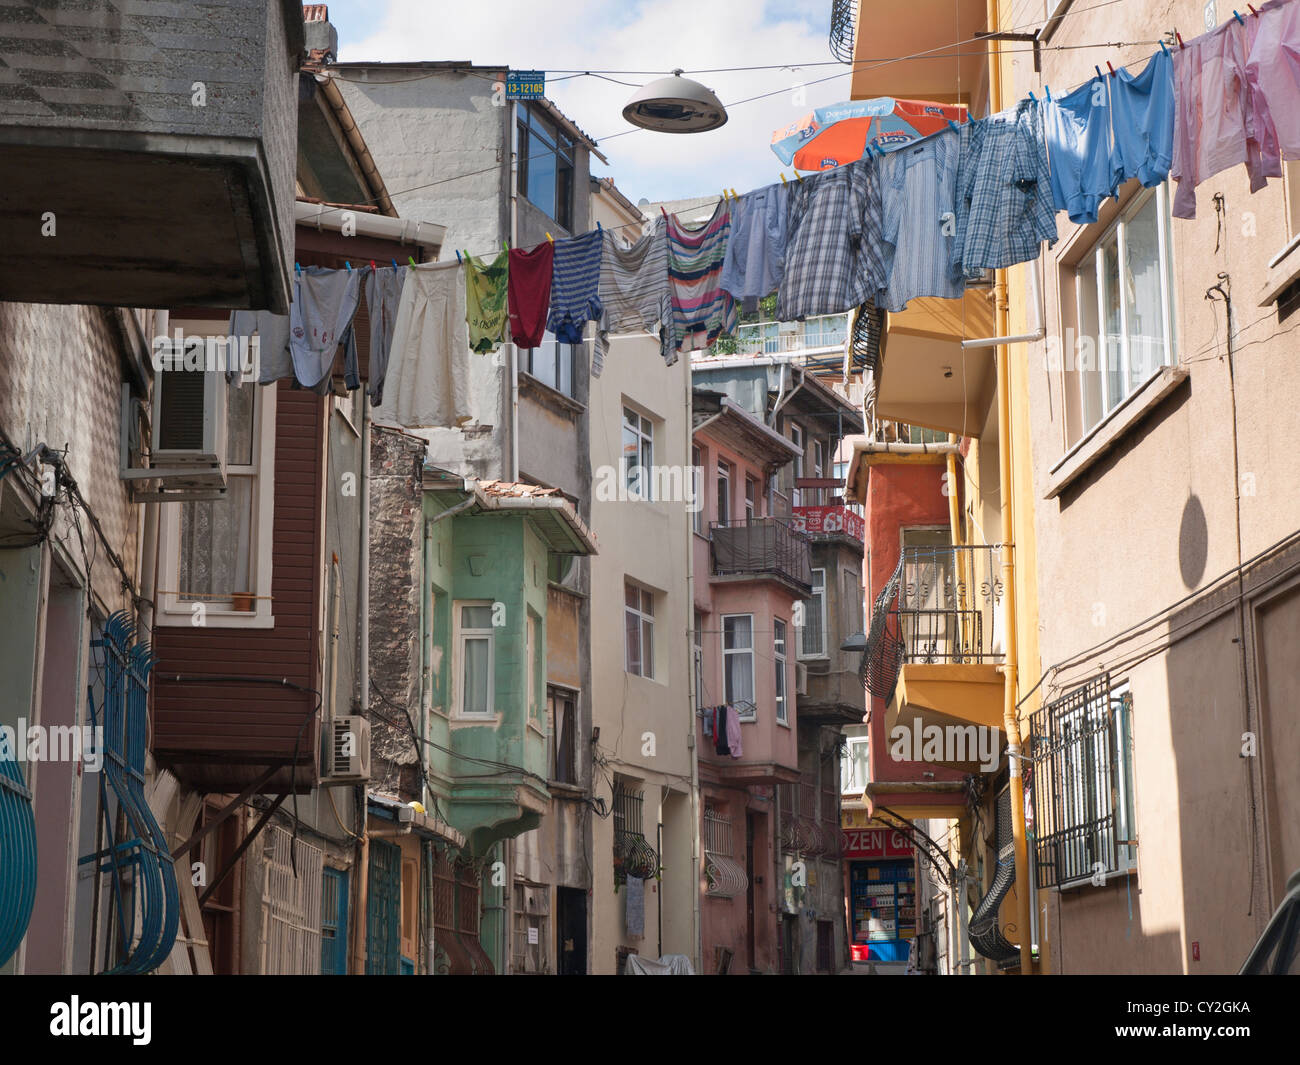 Clothes line, washing and  old houses in traditional Turkish style in the Balat, Istanbul Turkey Stock Photo